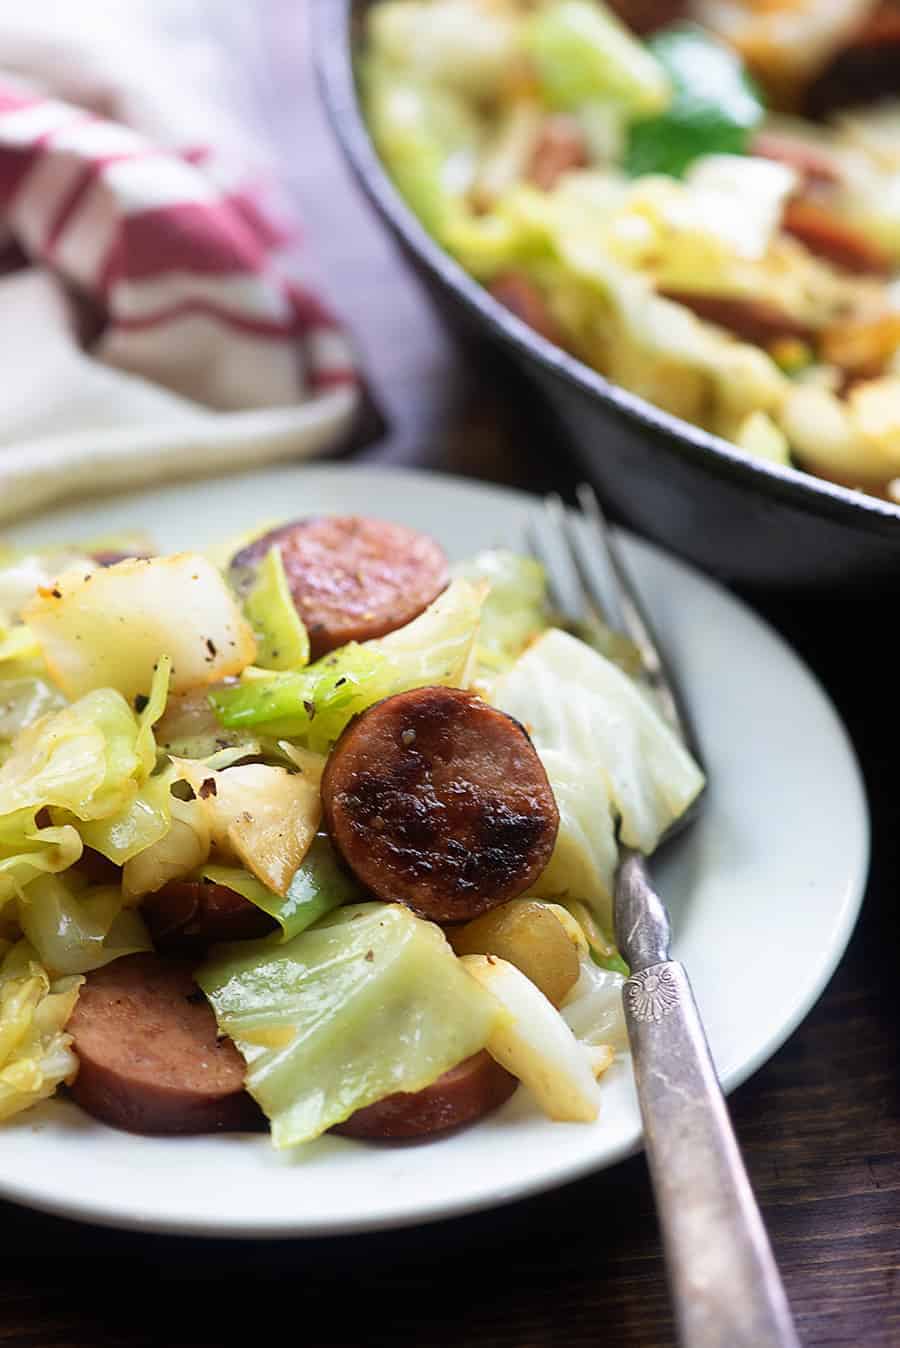 Sausage and cabbage on a white plate